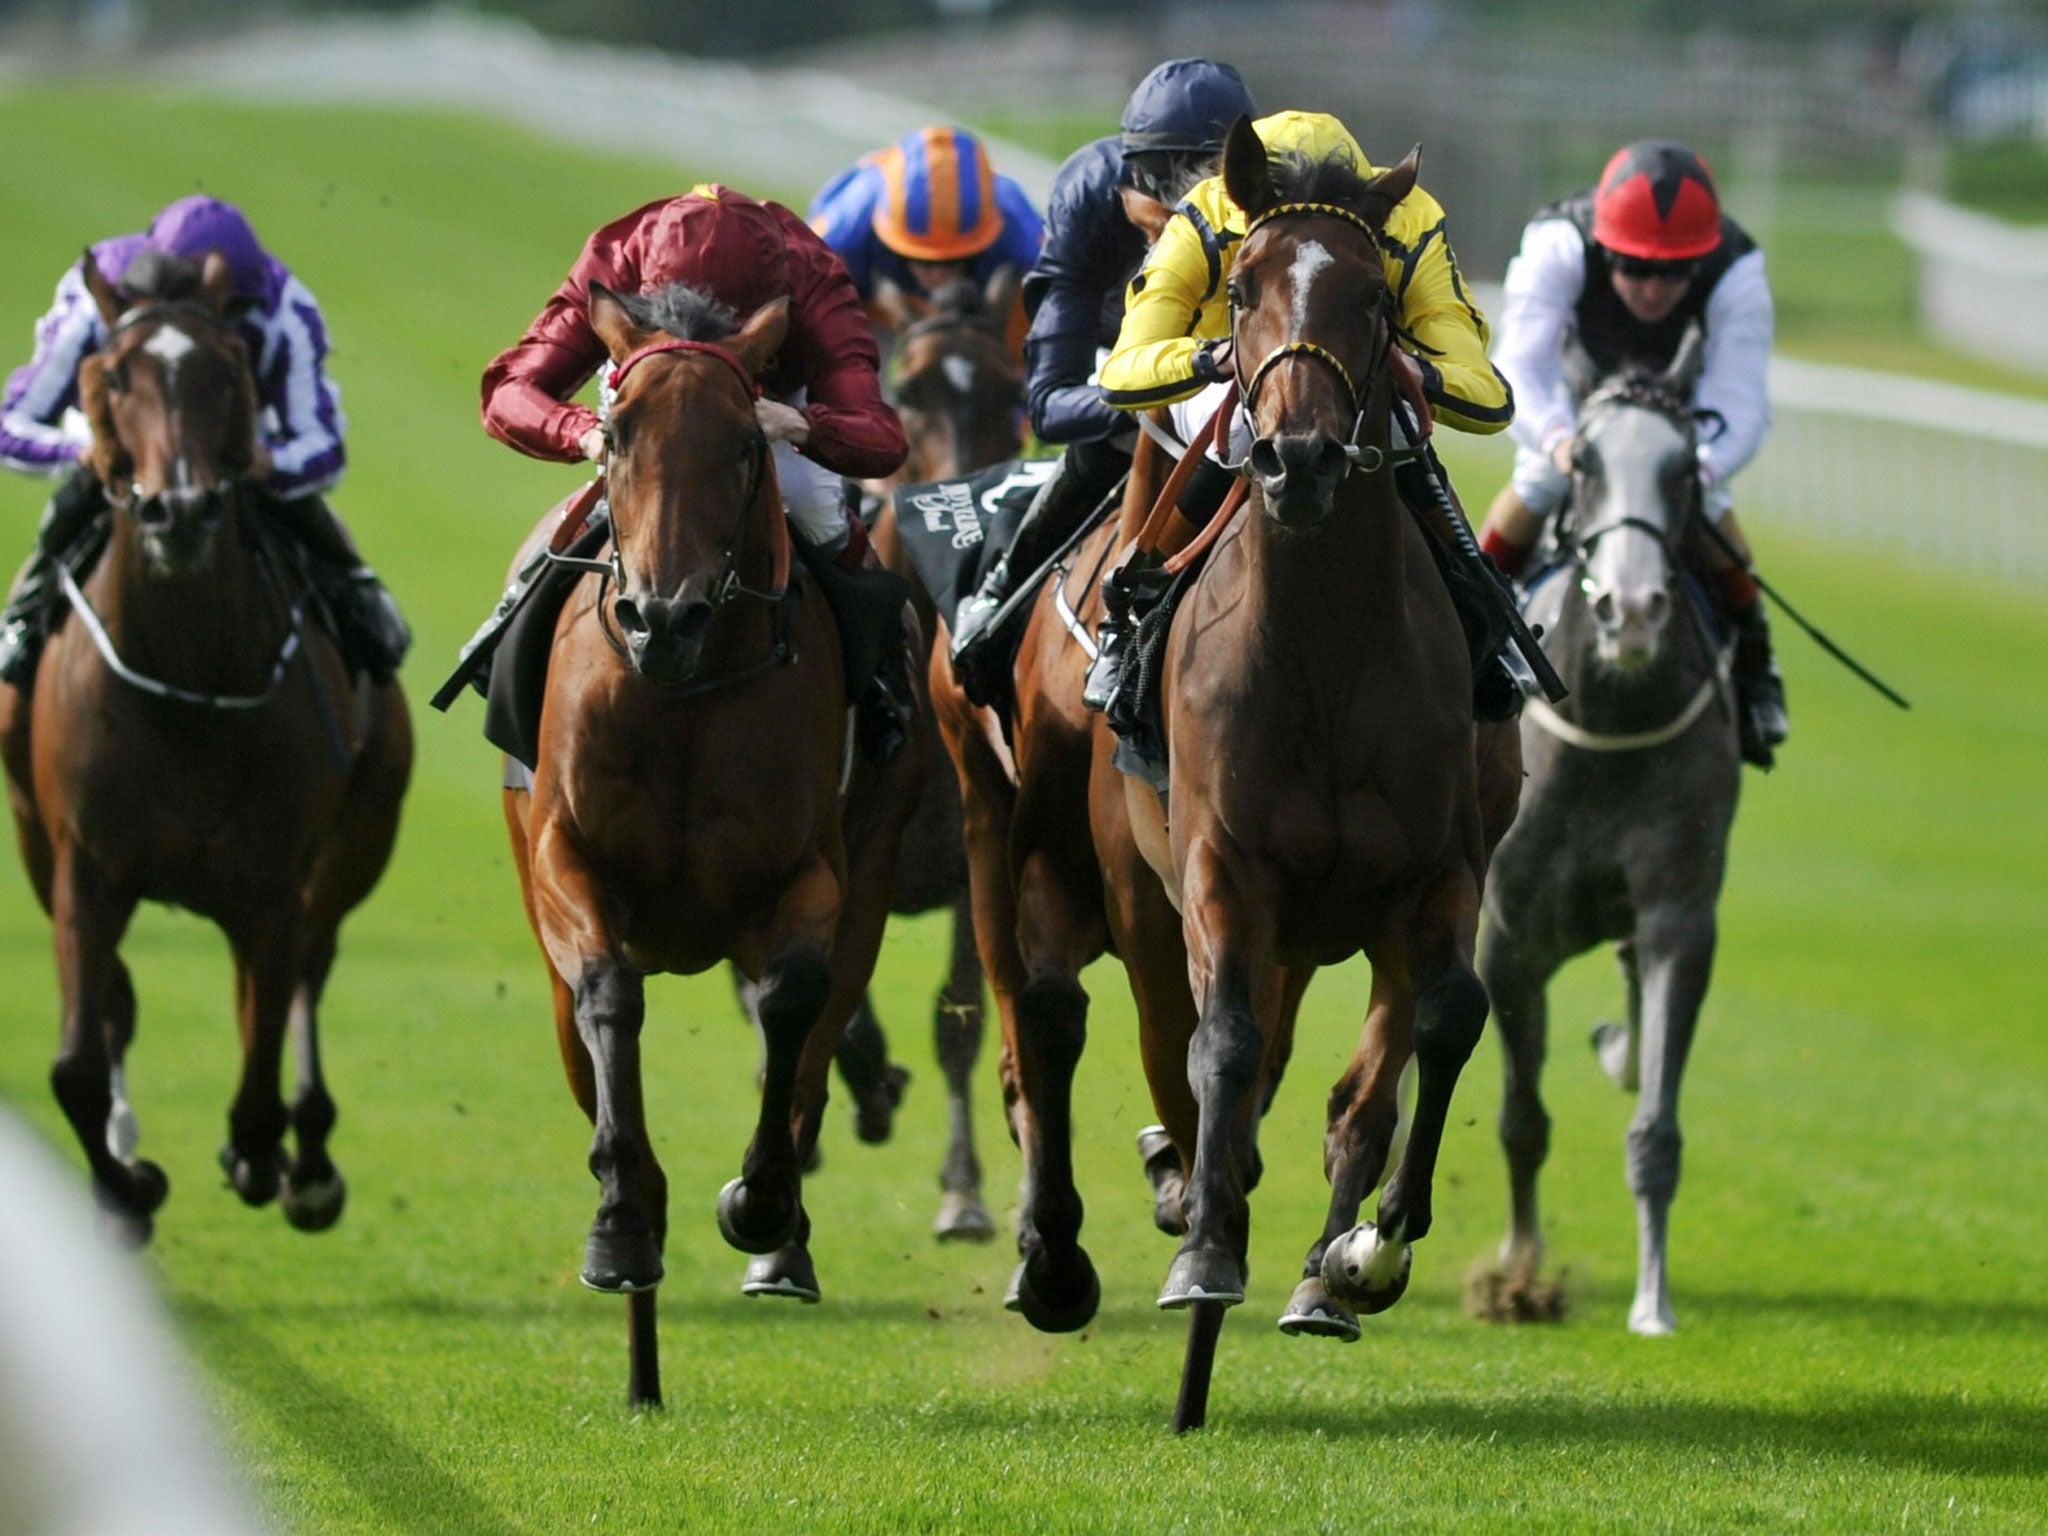 Rizeena (yellow silks) wins the Moyglare Stud Stakes at the Curragh